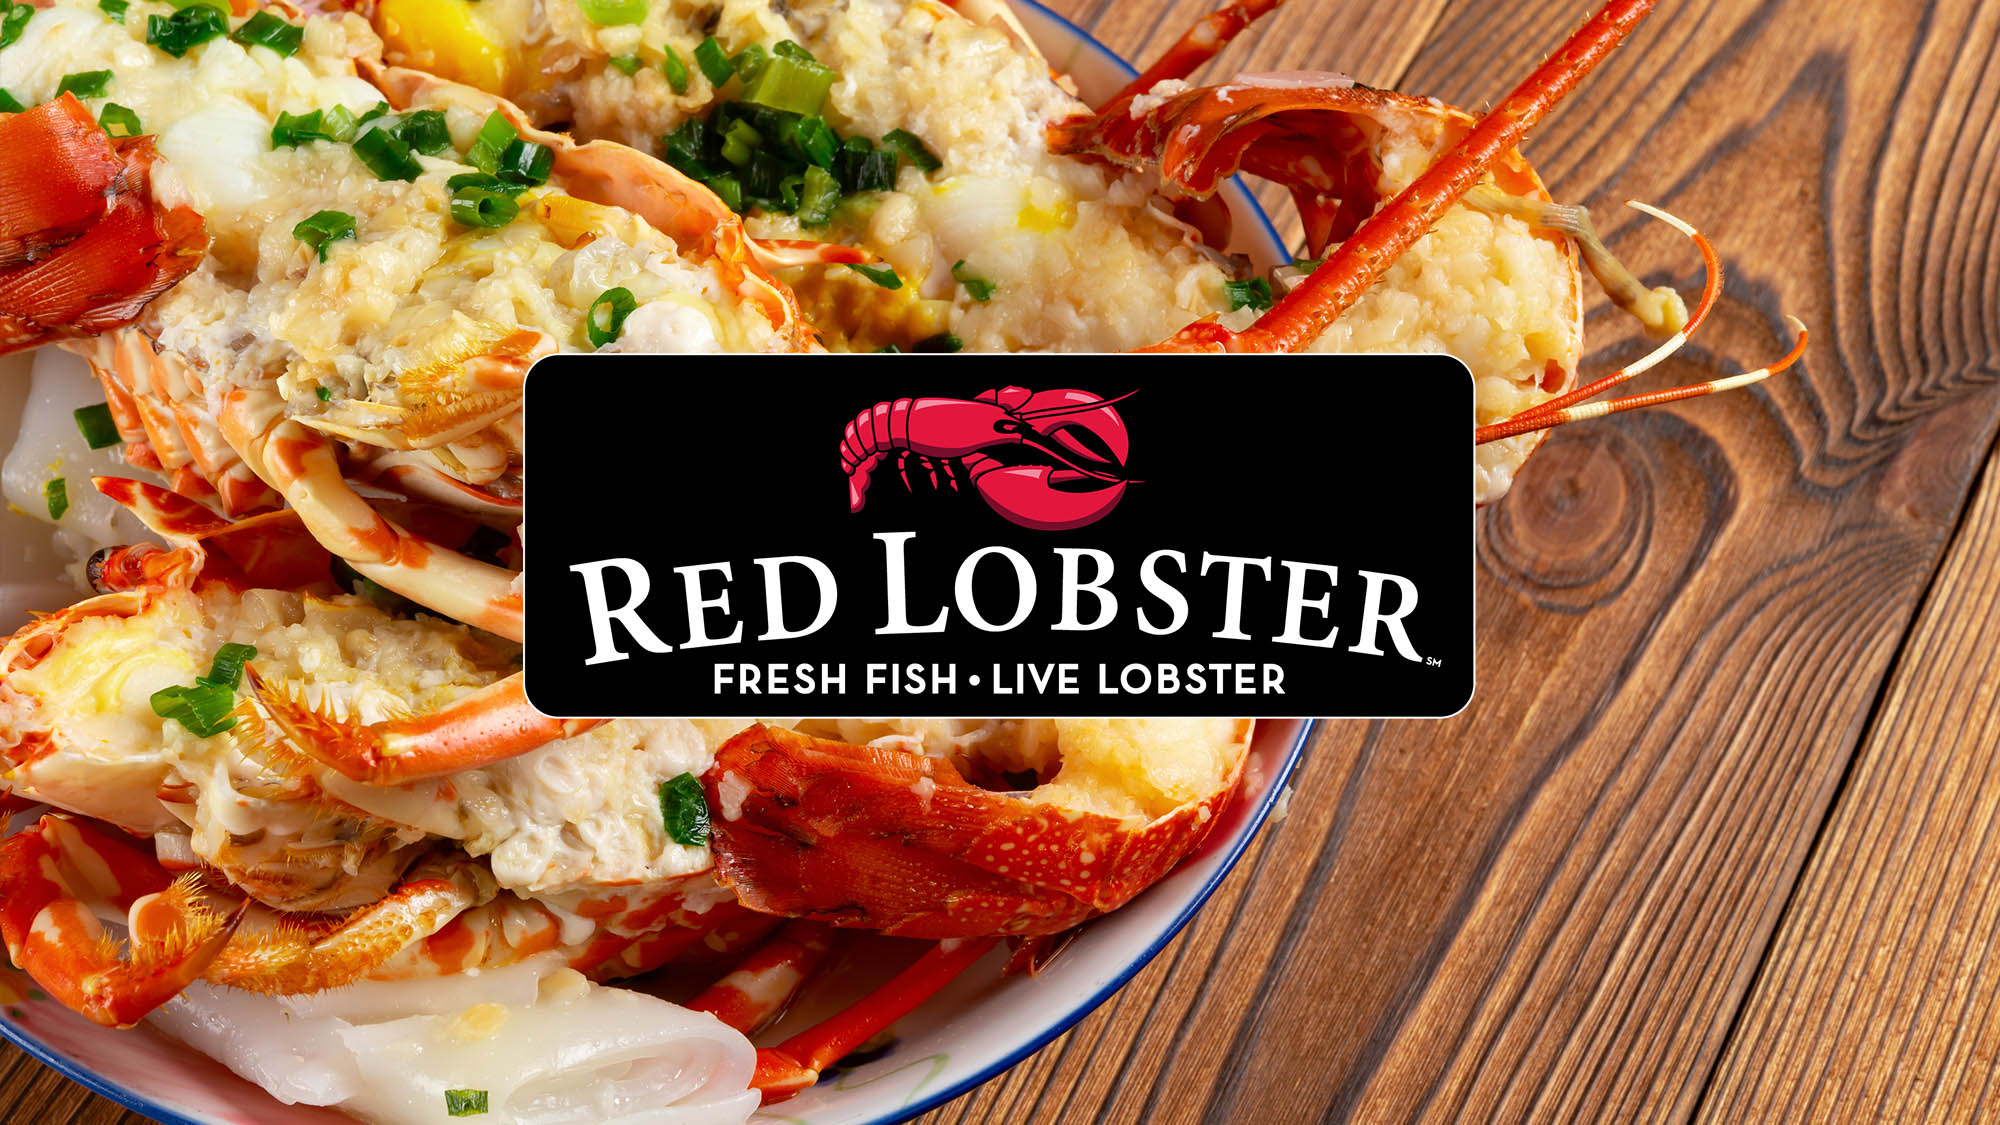 end-of-an-era-red-lobster-has-declared-bankruptcy-after-paying-for-a-6